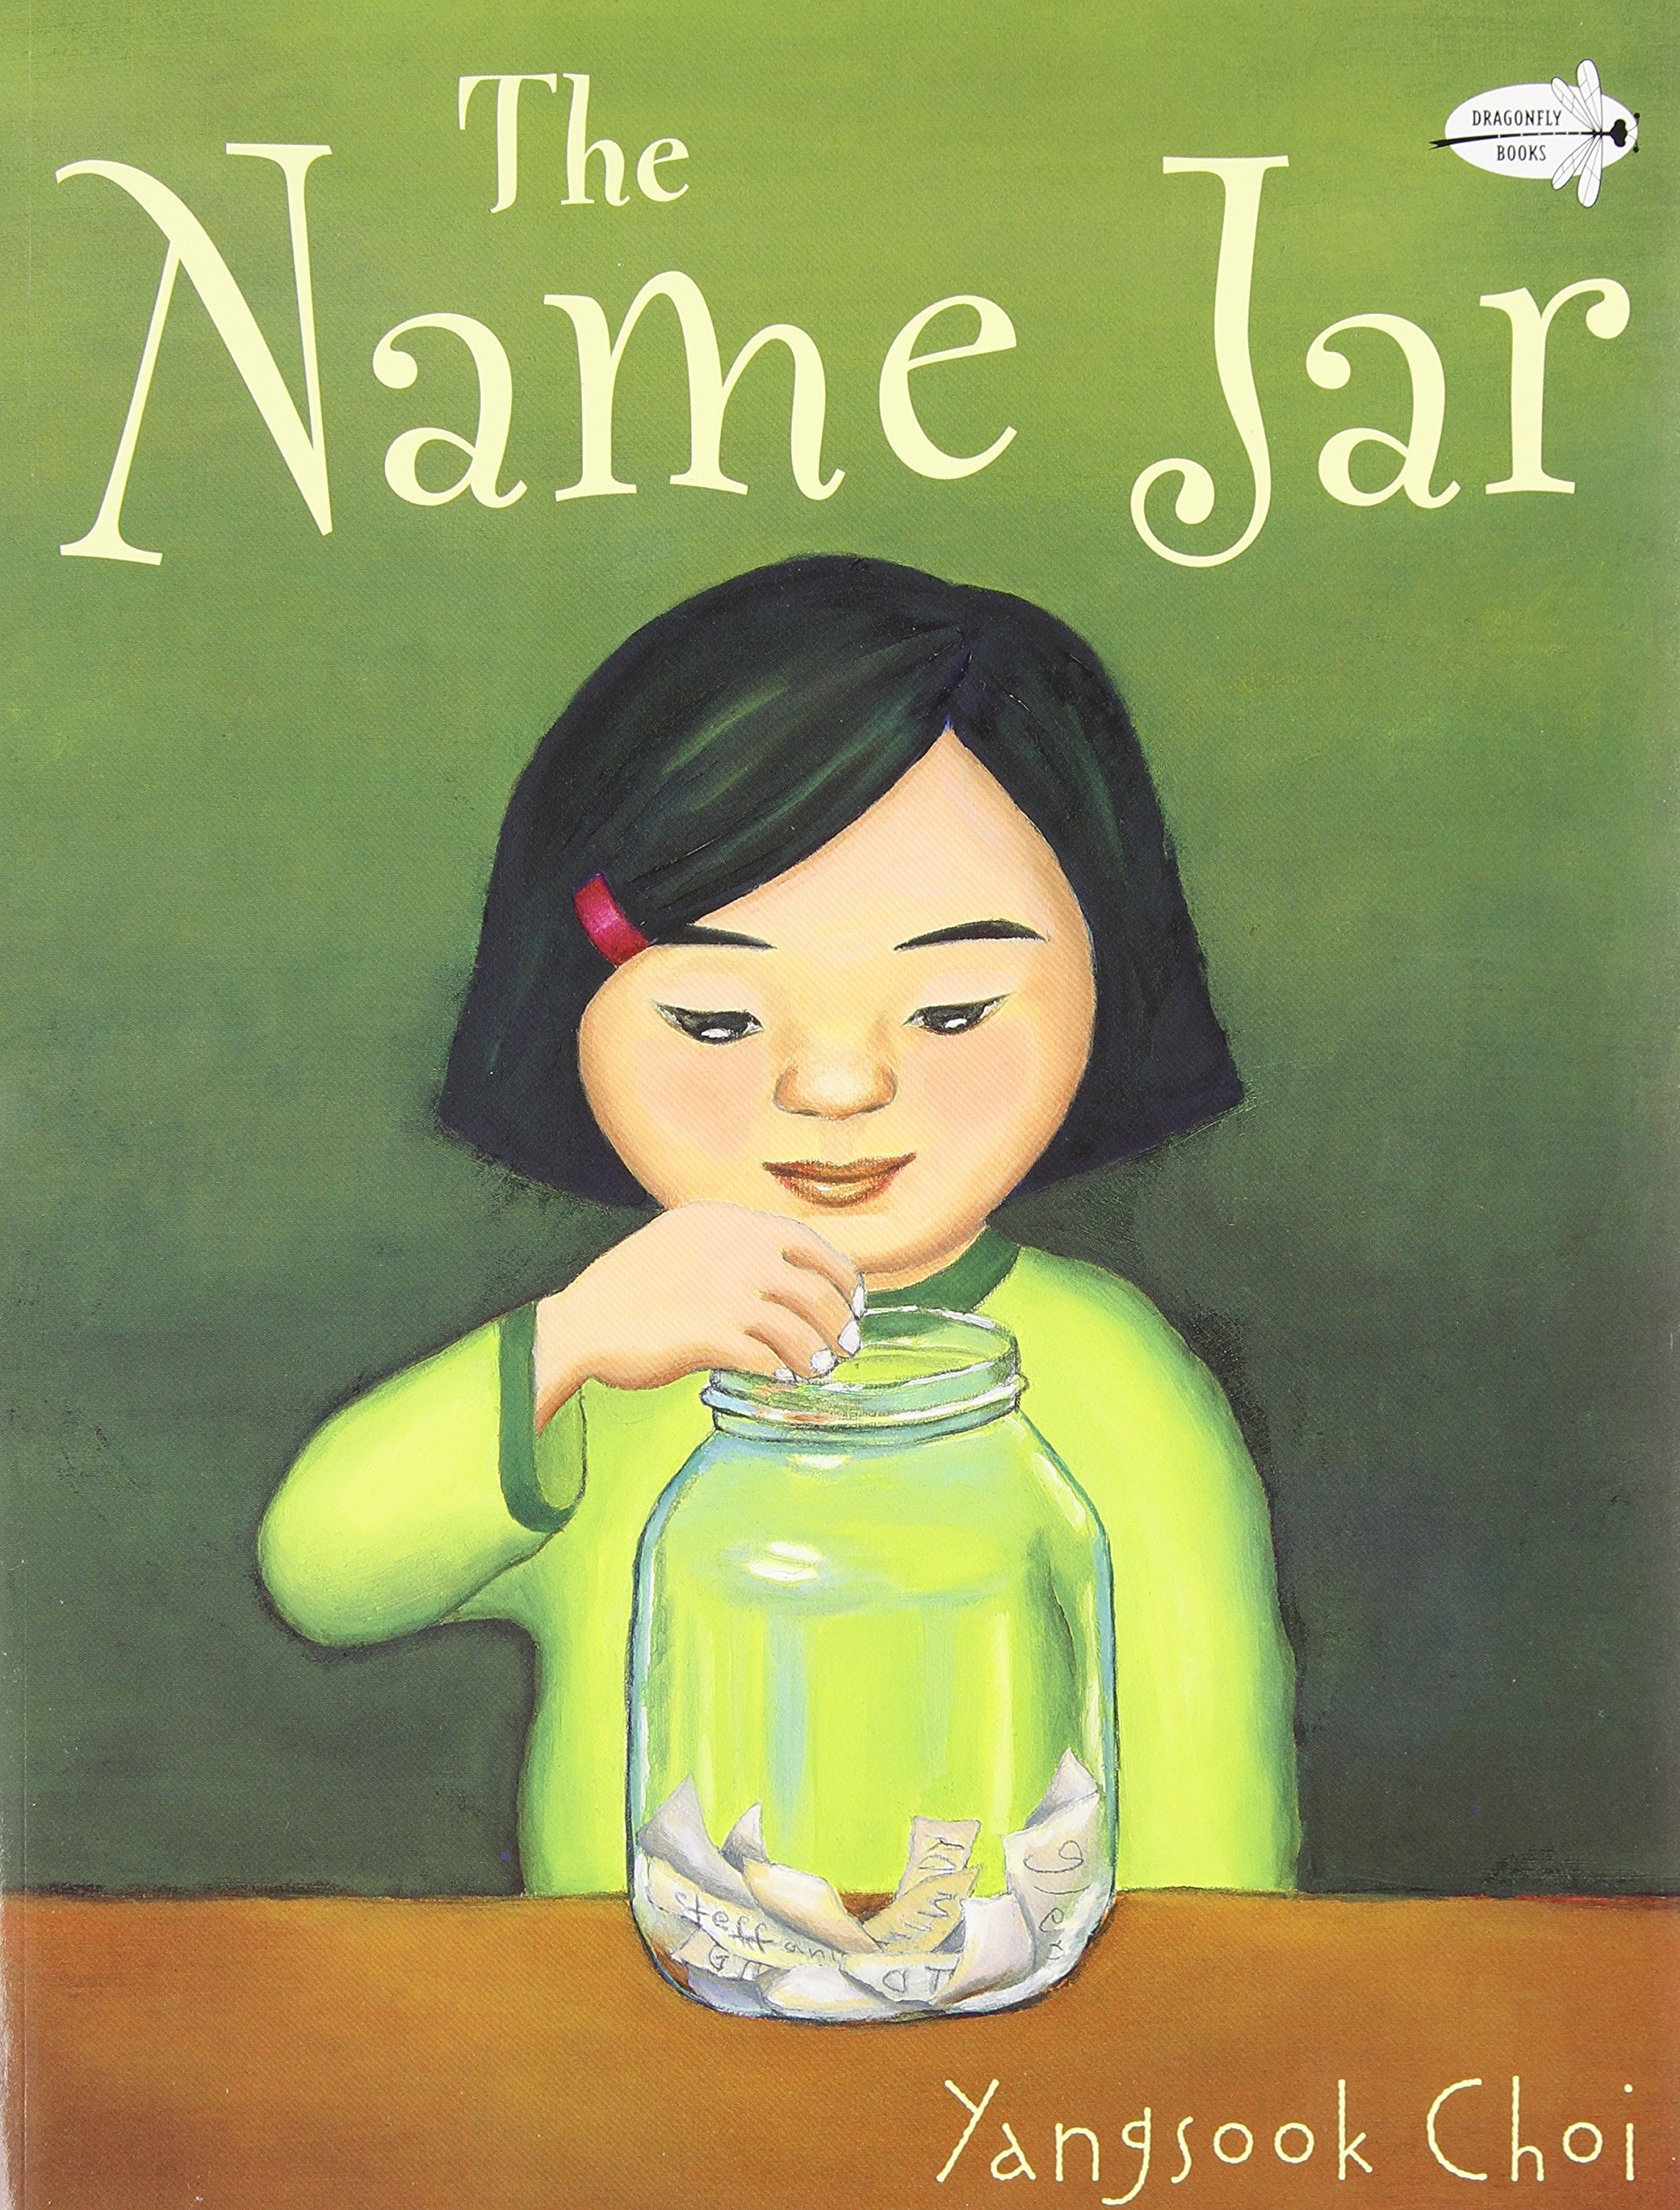 The cover for the book The Name Jar